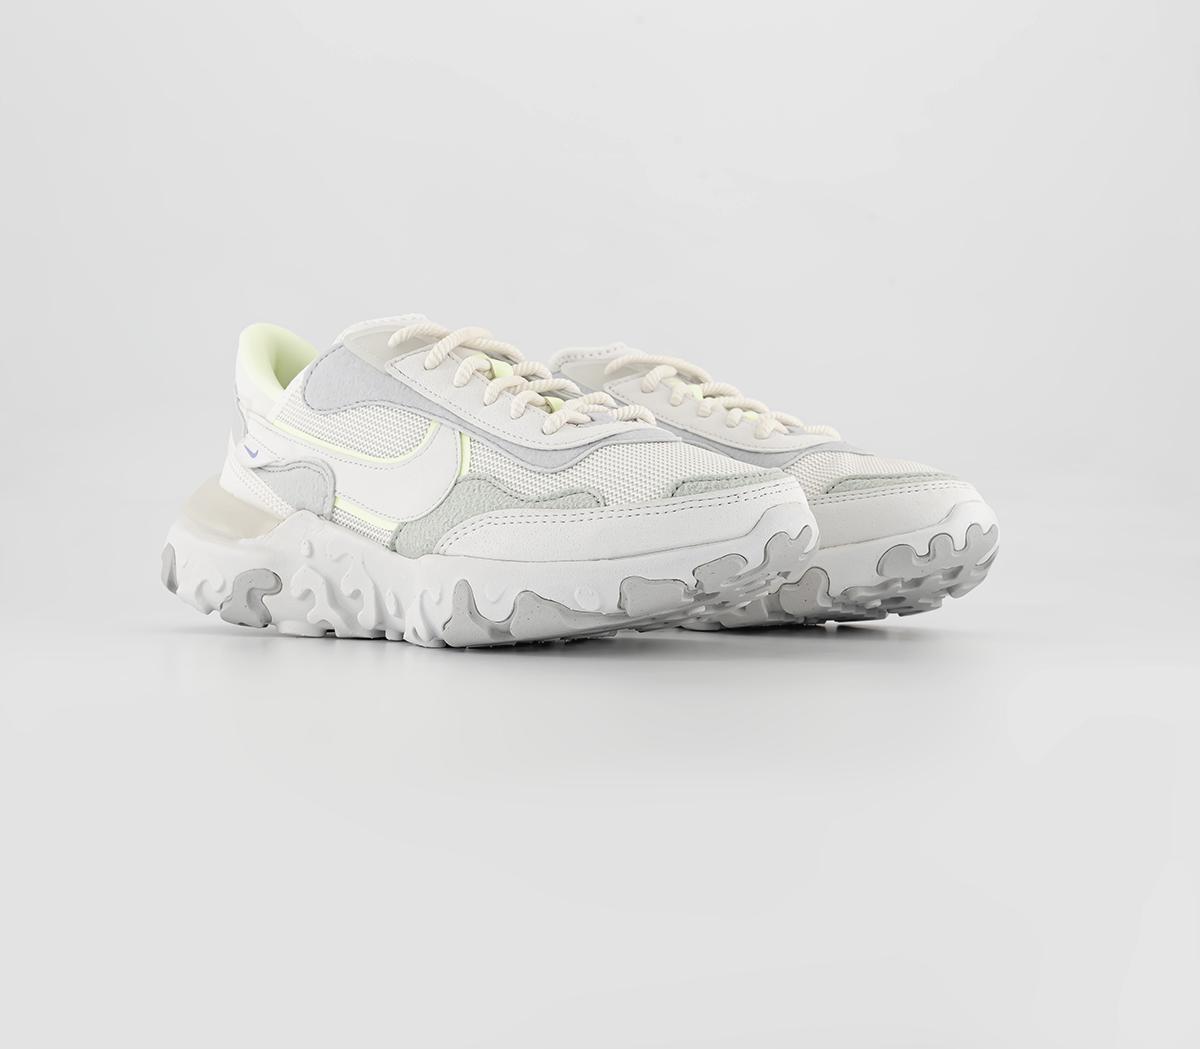 Nike Womens React Revision Trainers Summit White Photon Dust, 4